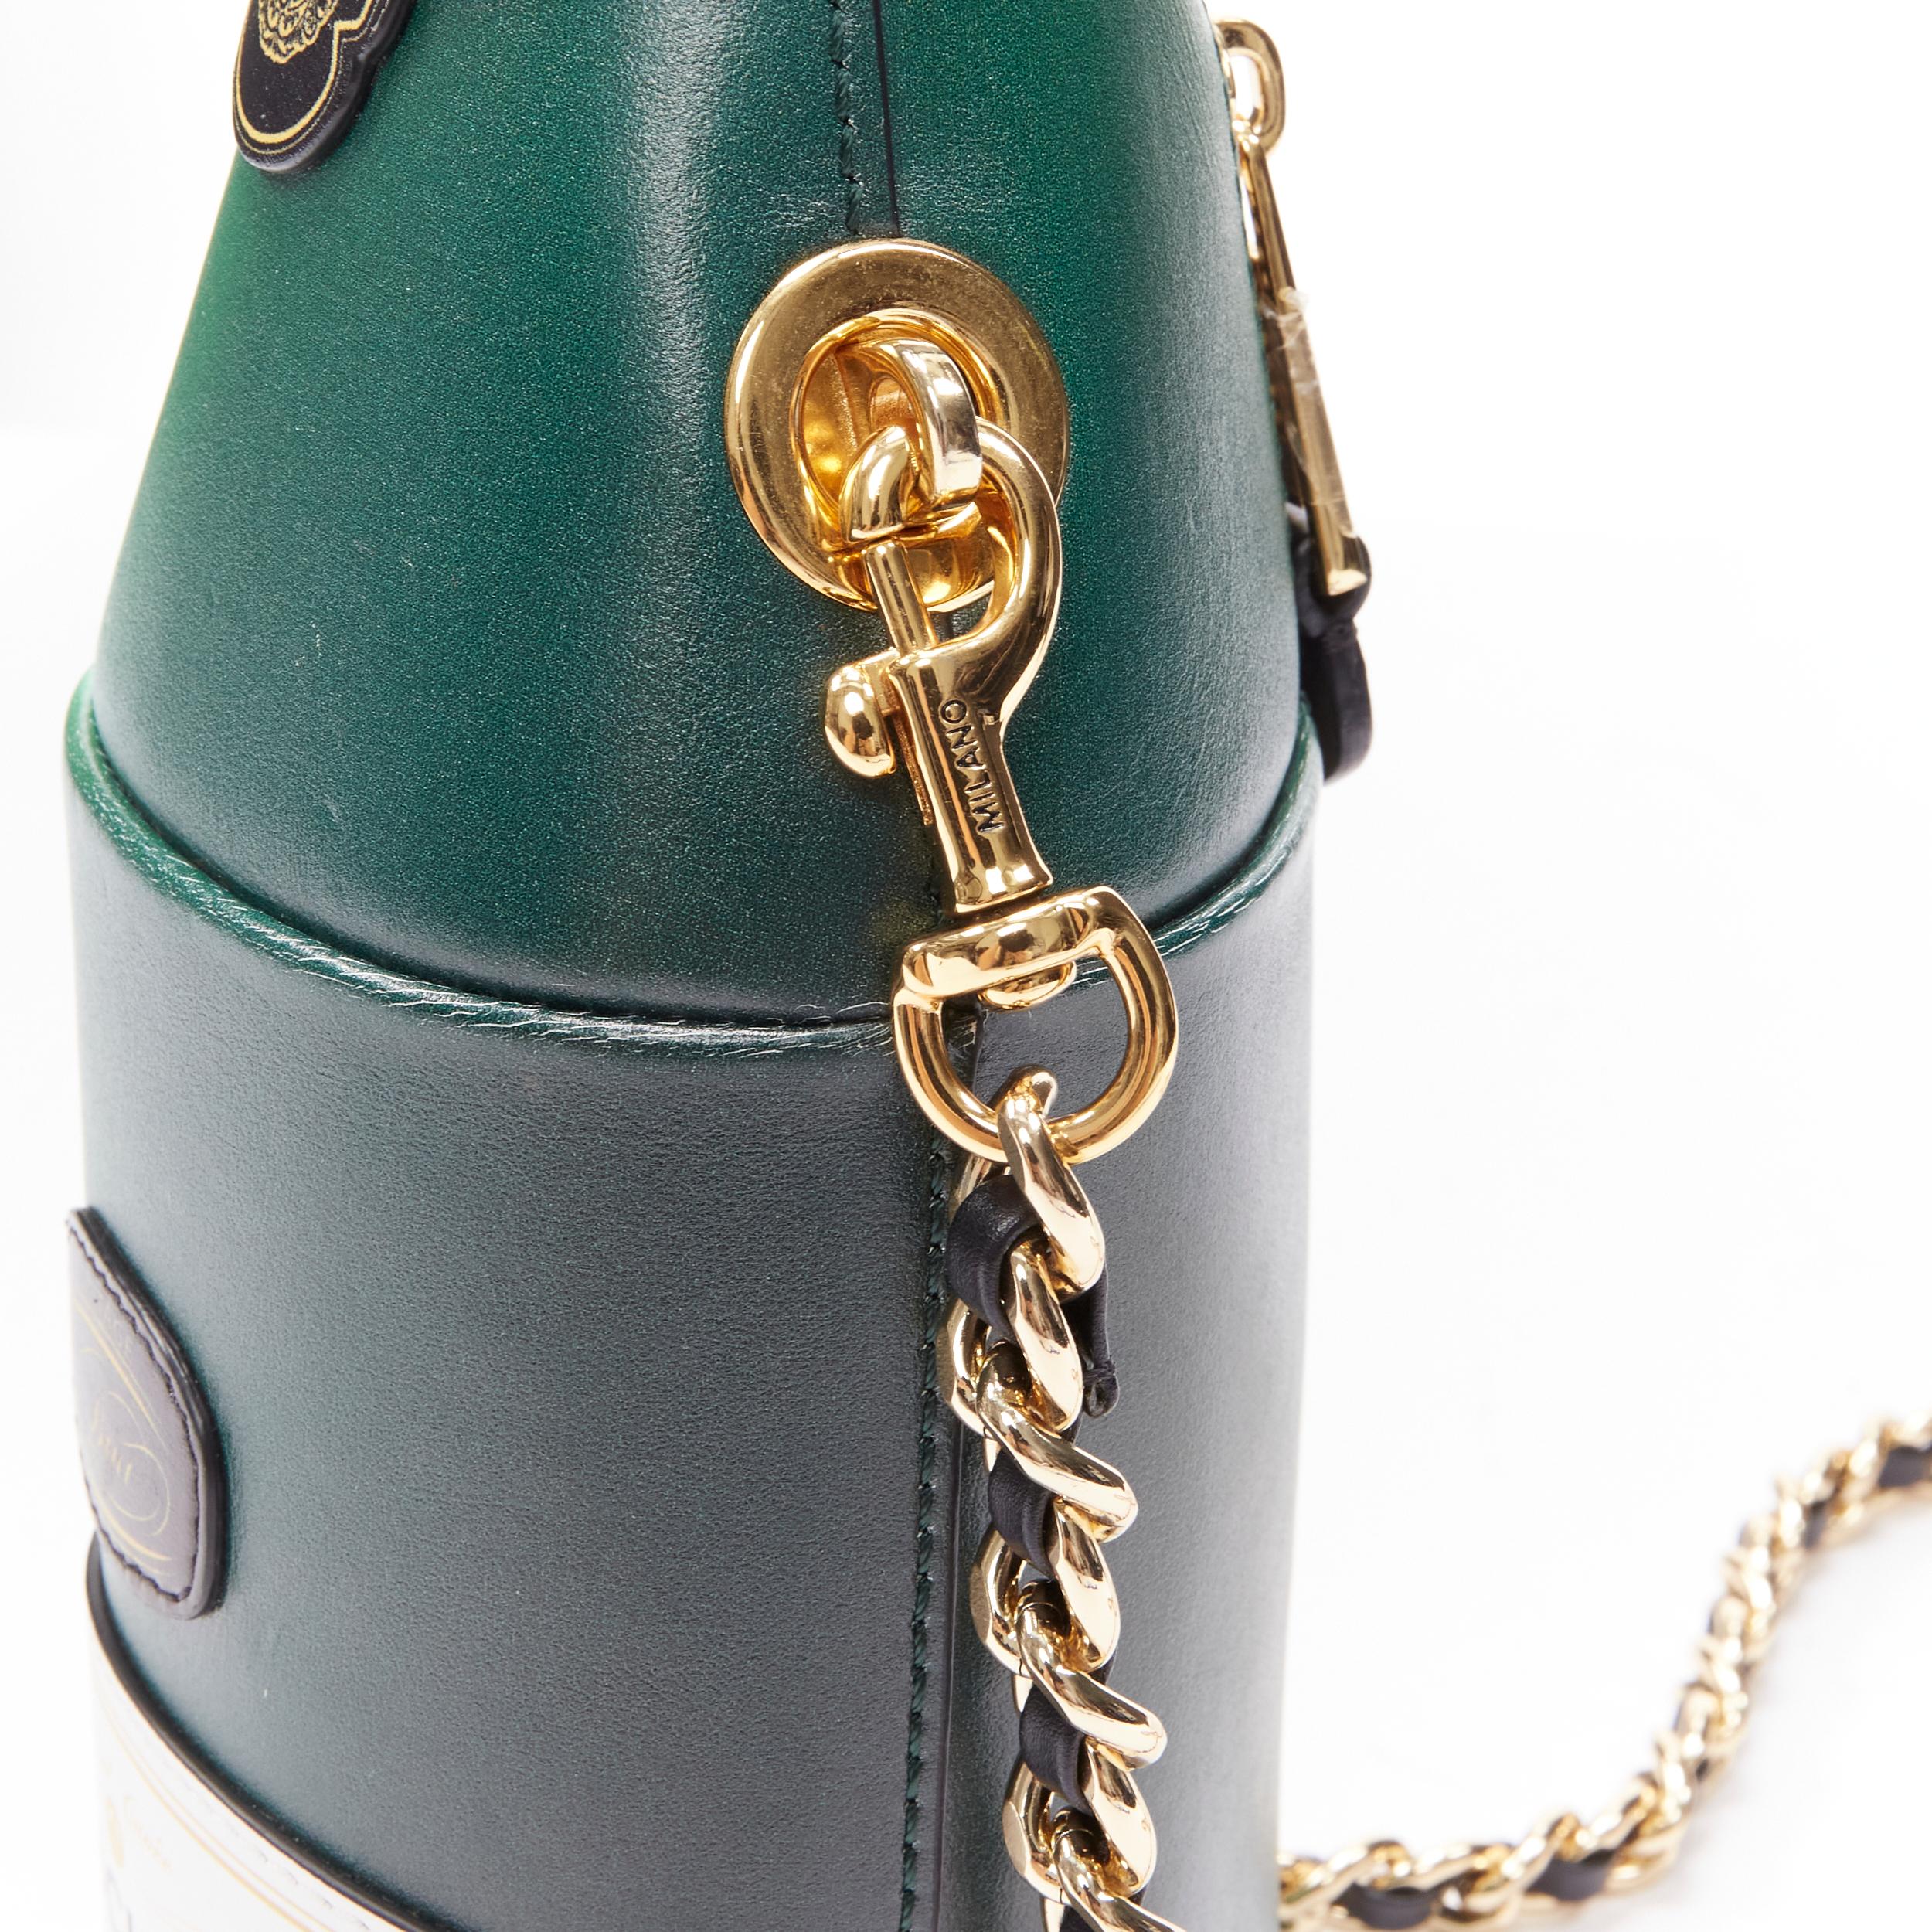 rare MOSCHINO Couture! 2019 runway green leather Champagne bottle crossbody bag 1